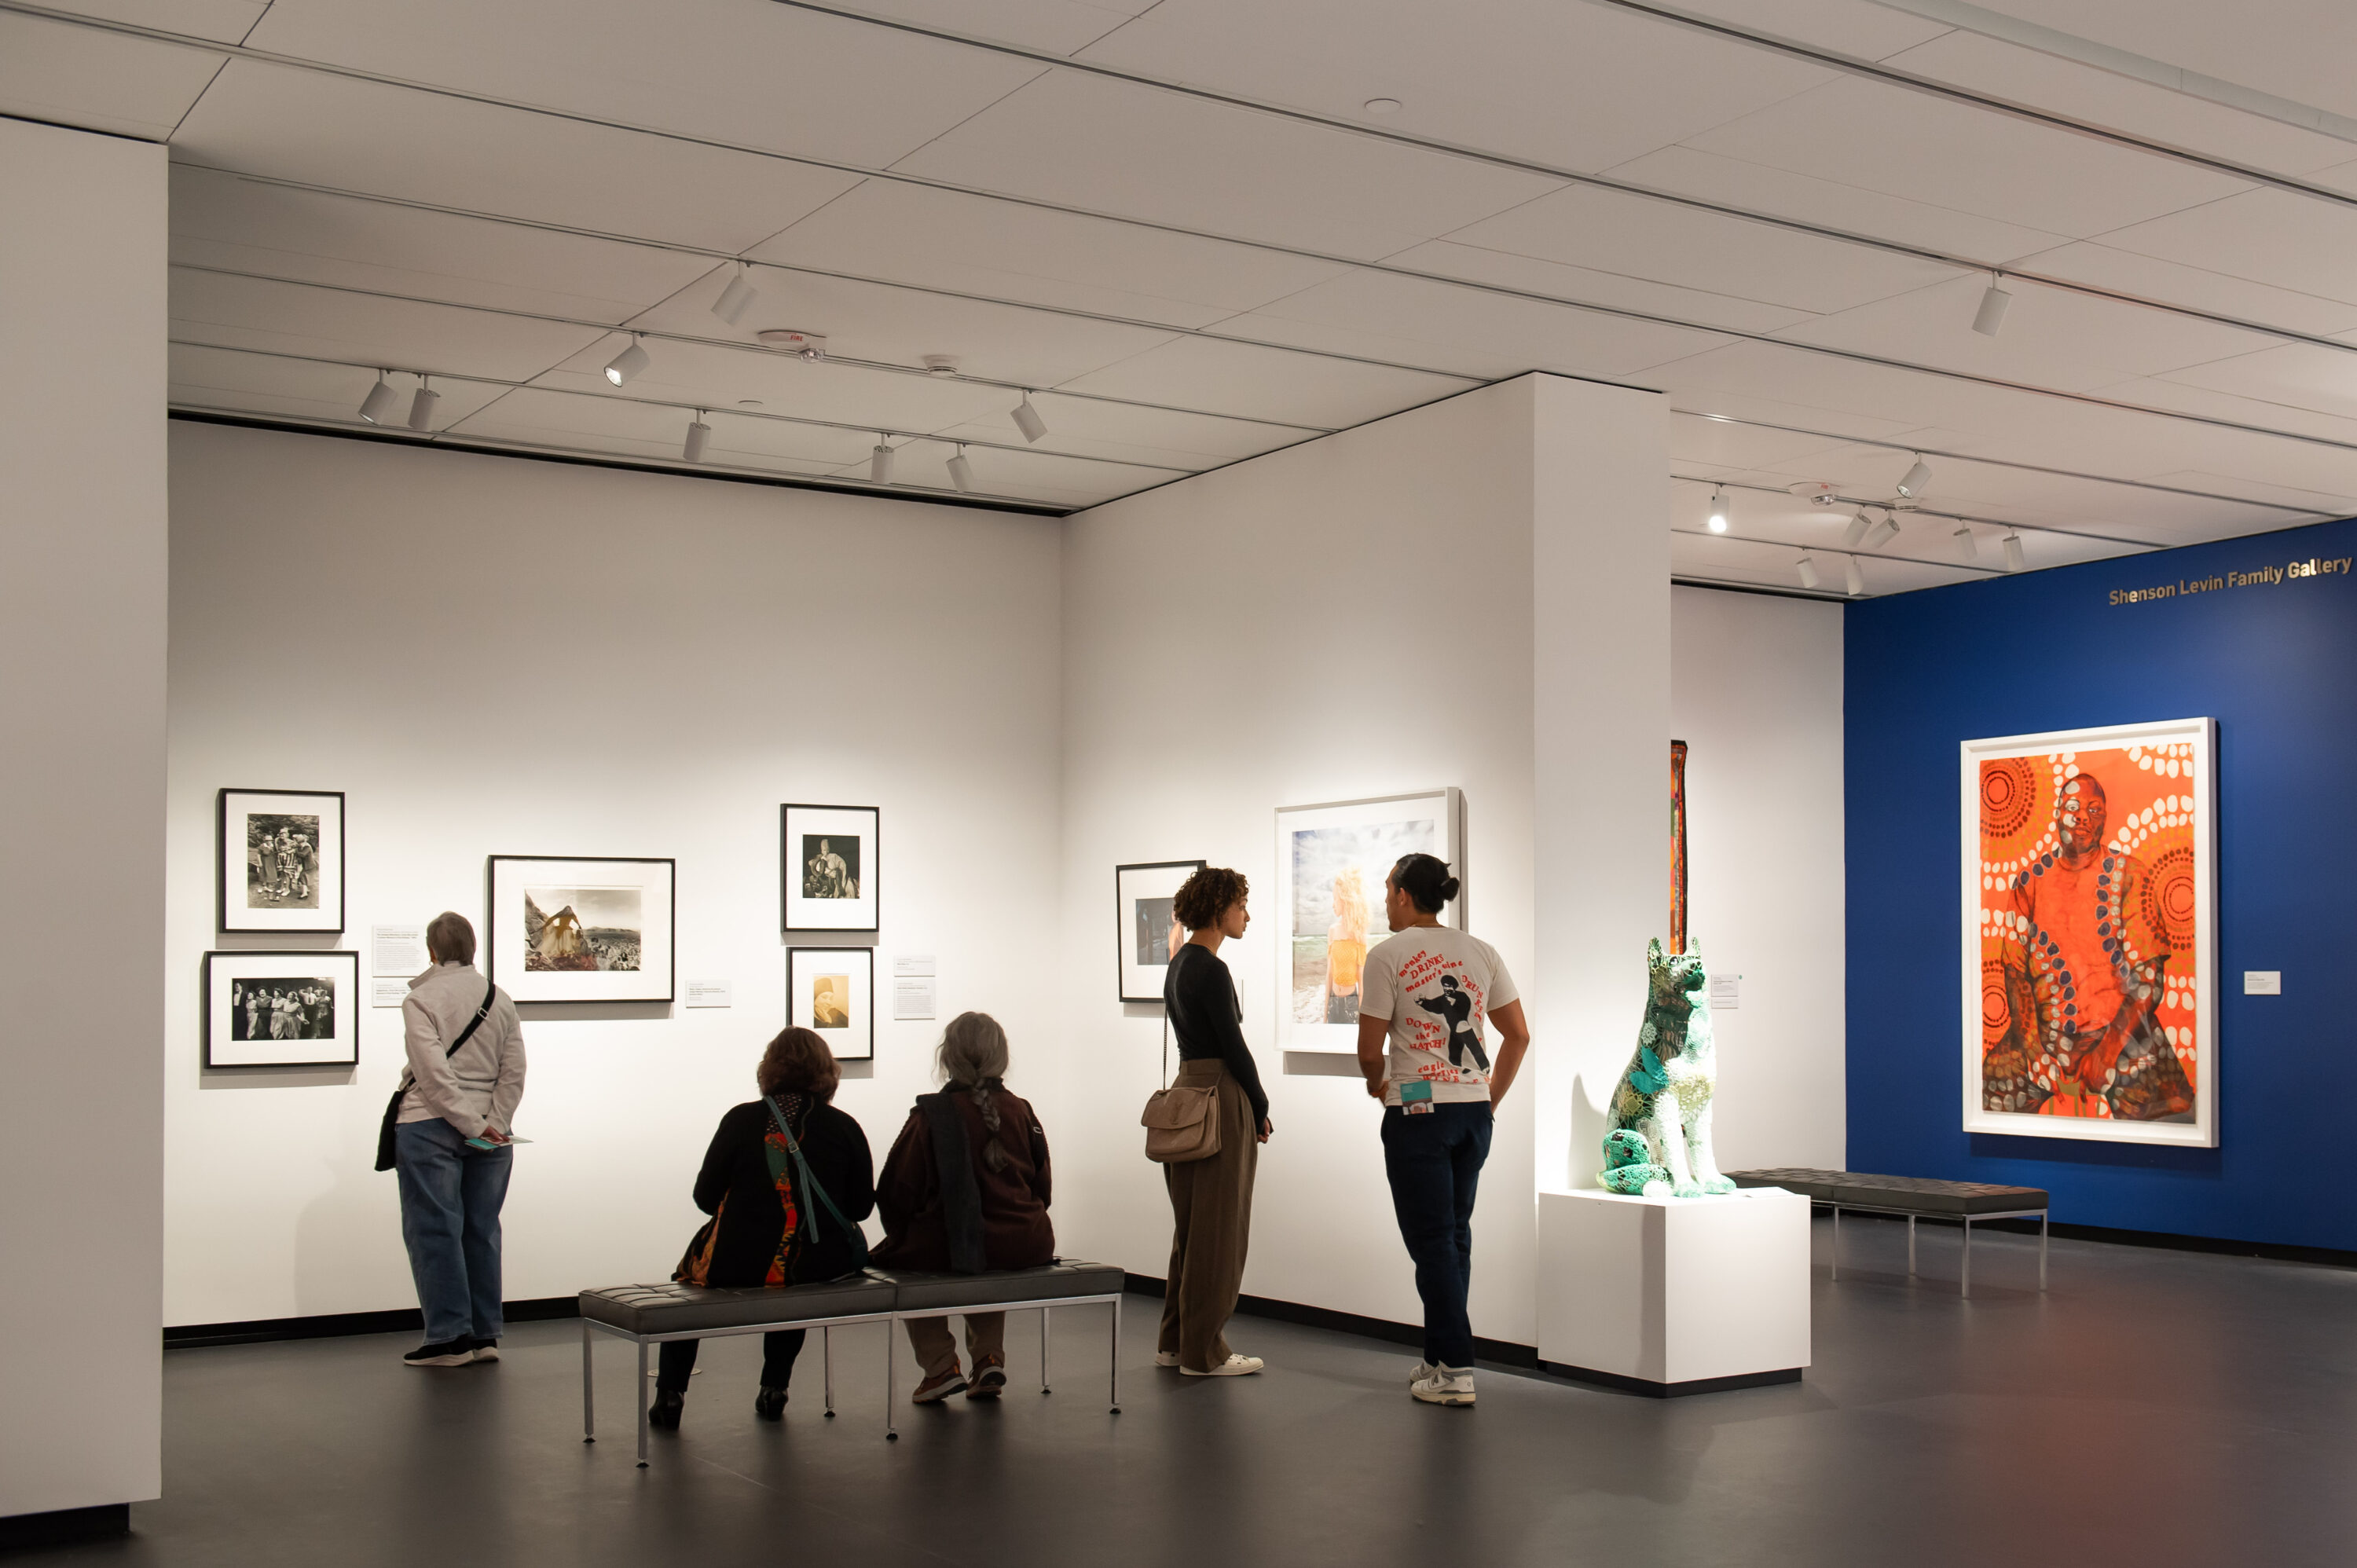 A modern museum gallery is photographed at a wide angle. Visitors observe large artworks on the walls and sculptures on pedestals.